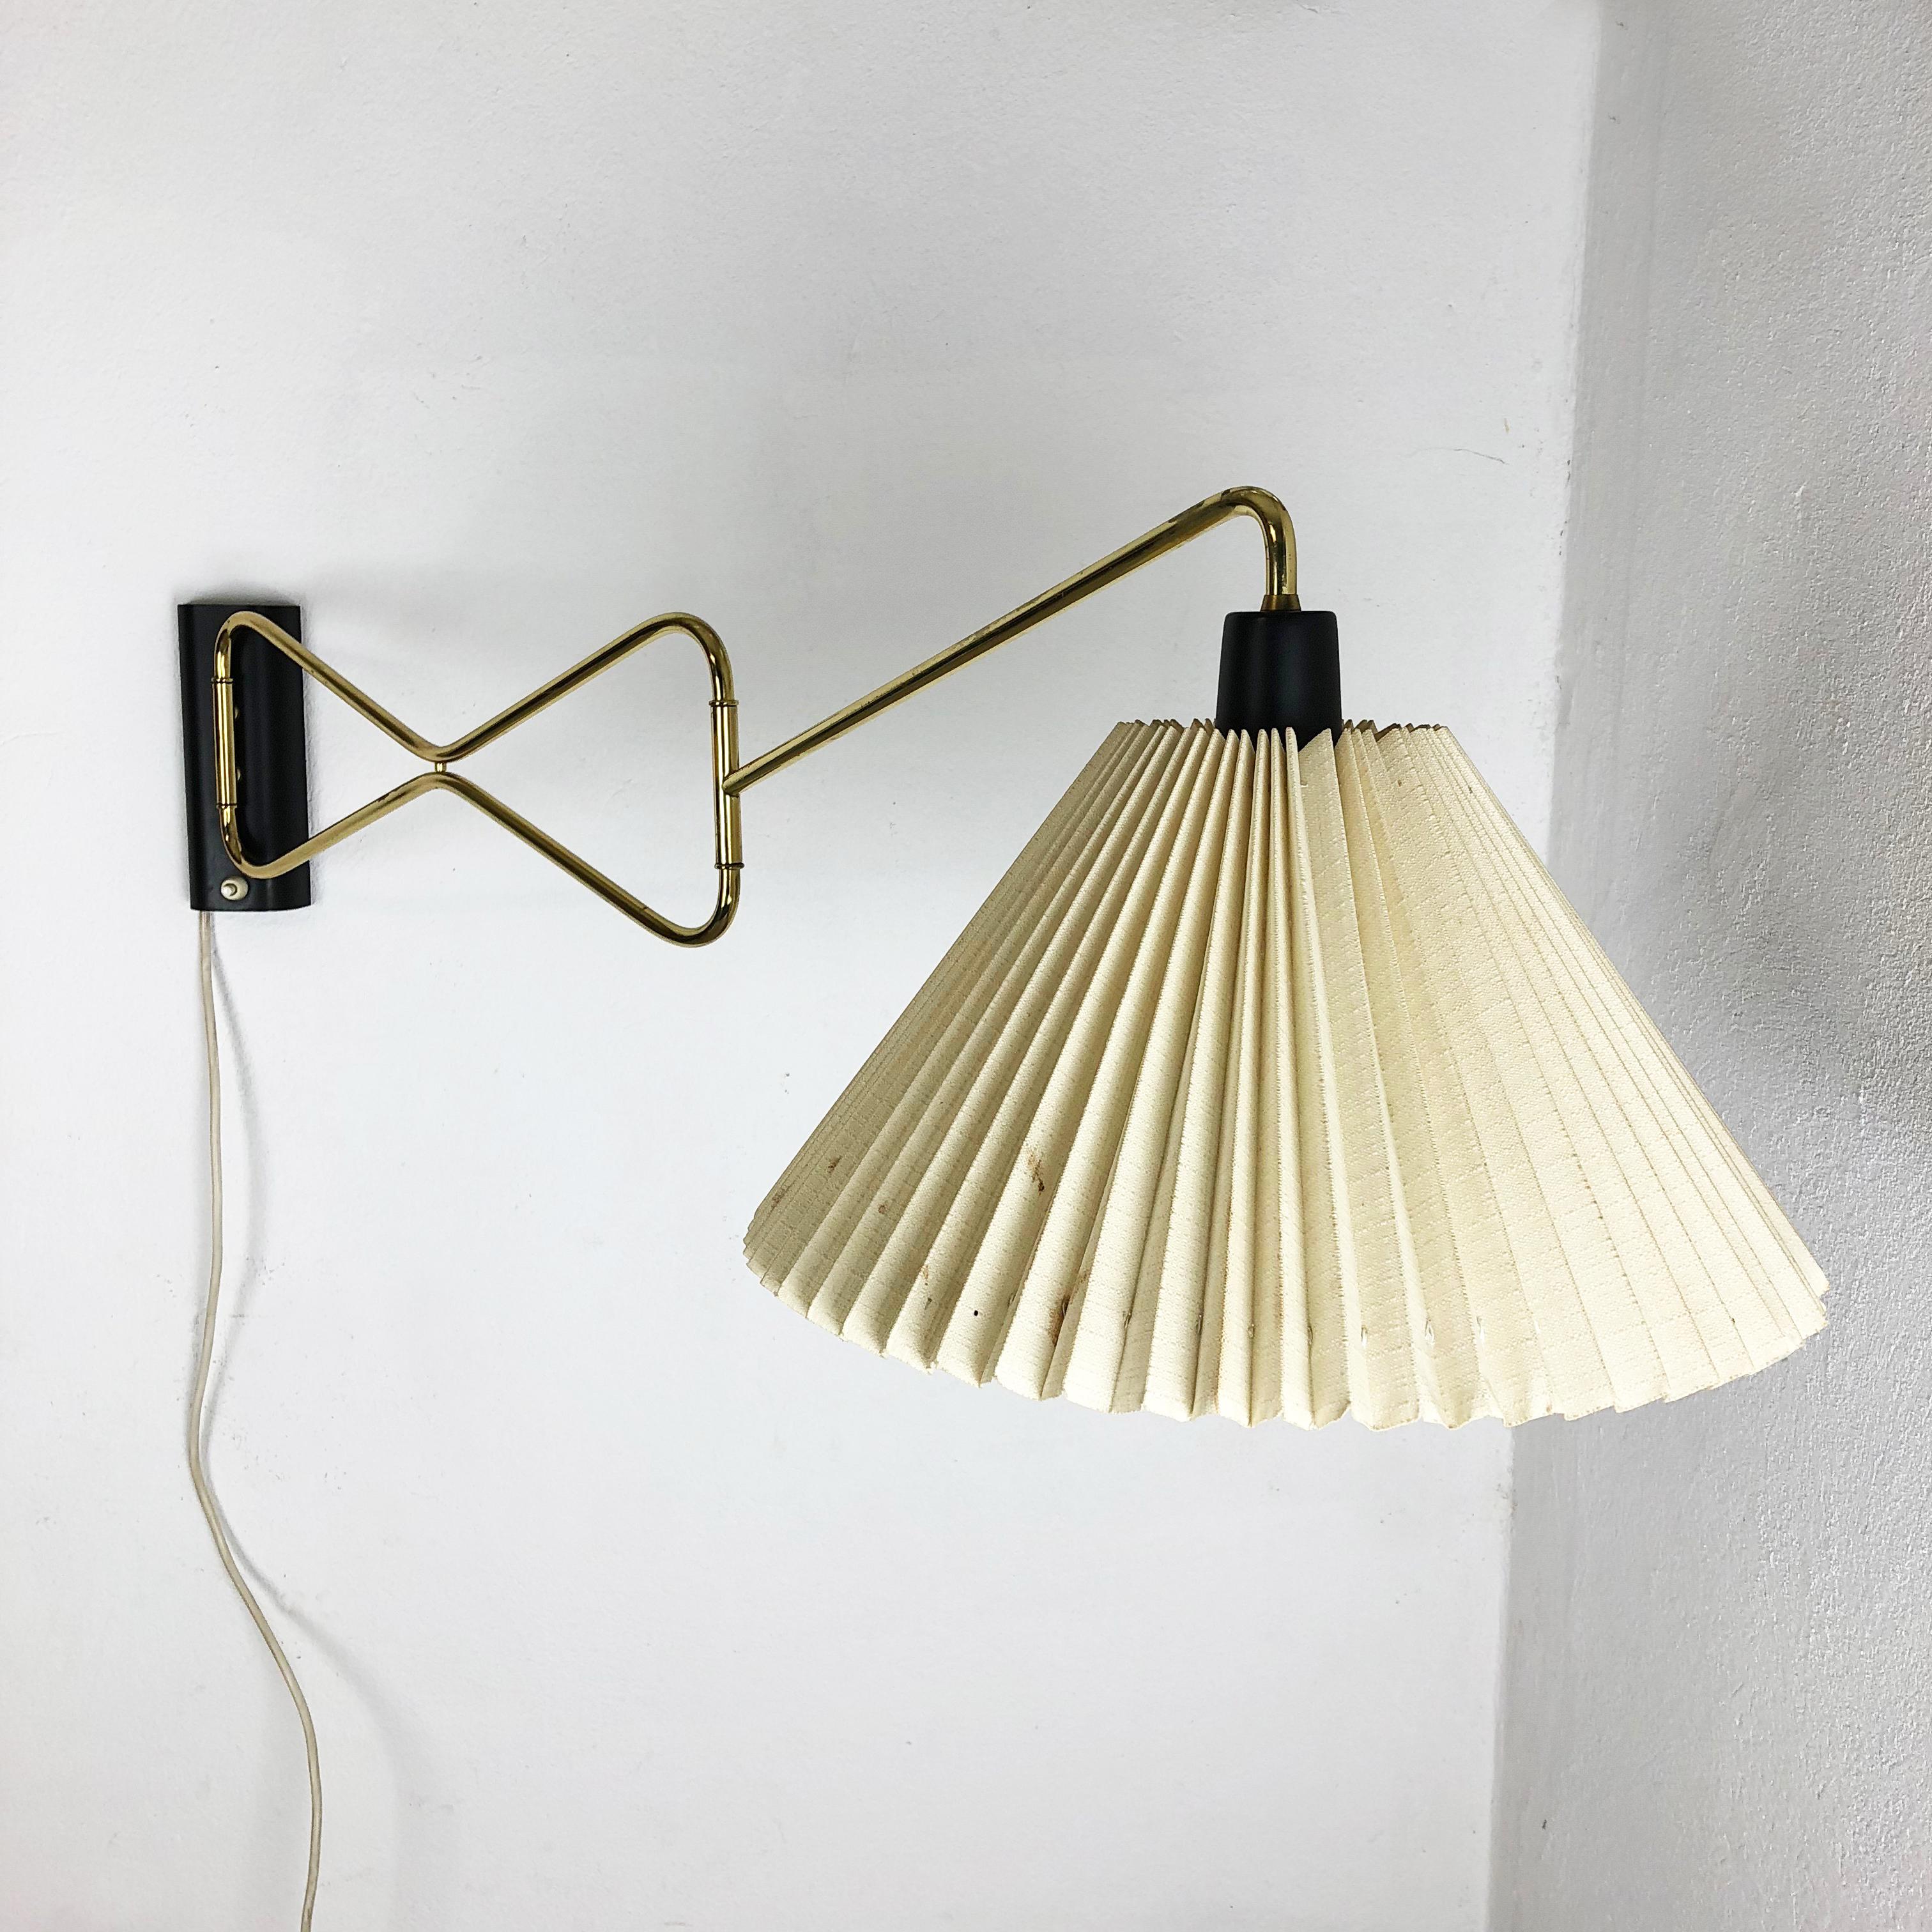 Article:

wall light


Origin:

Germany


Producer:

Cosack lights, Germany


Material:

Metal fabric


Age:

1950s




   

This original 1950s wall light was designed and produced by COSACK in Germany. it is in its